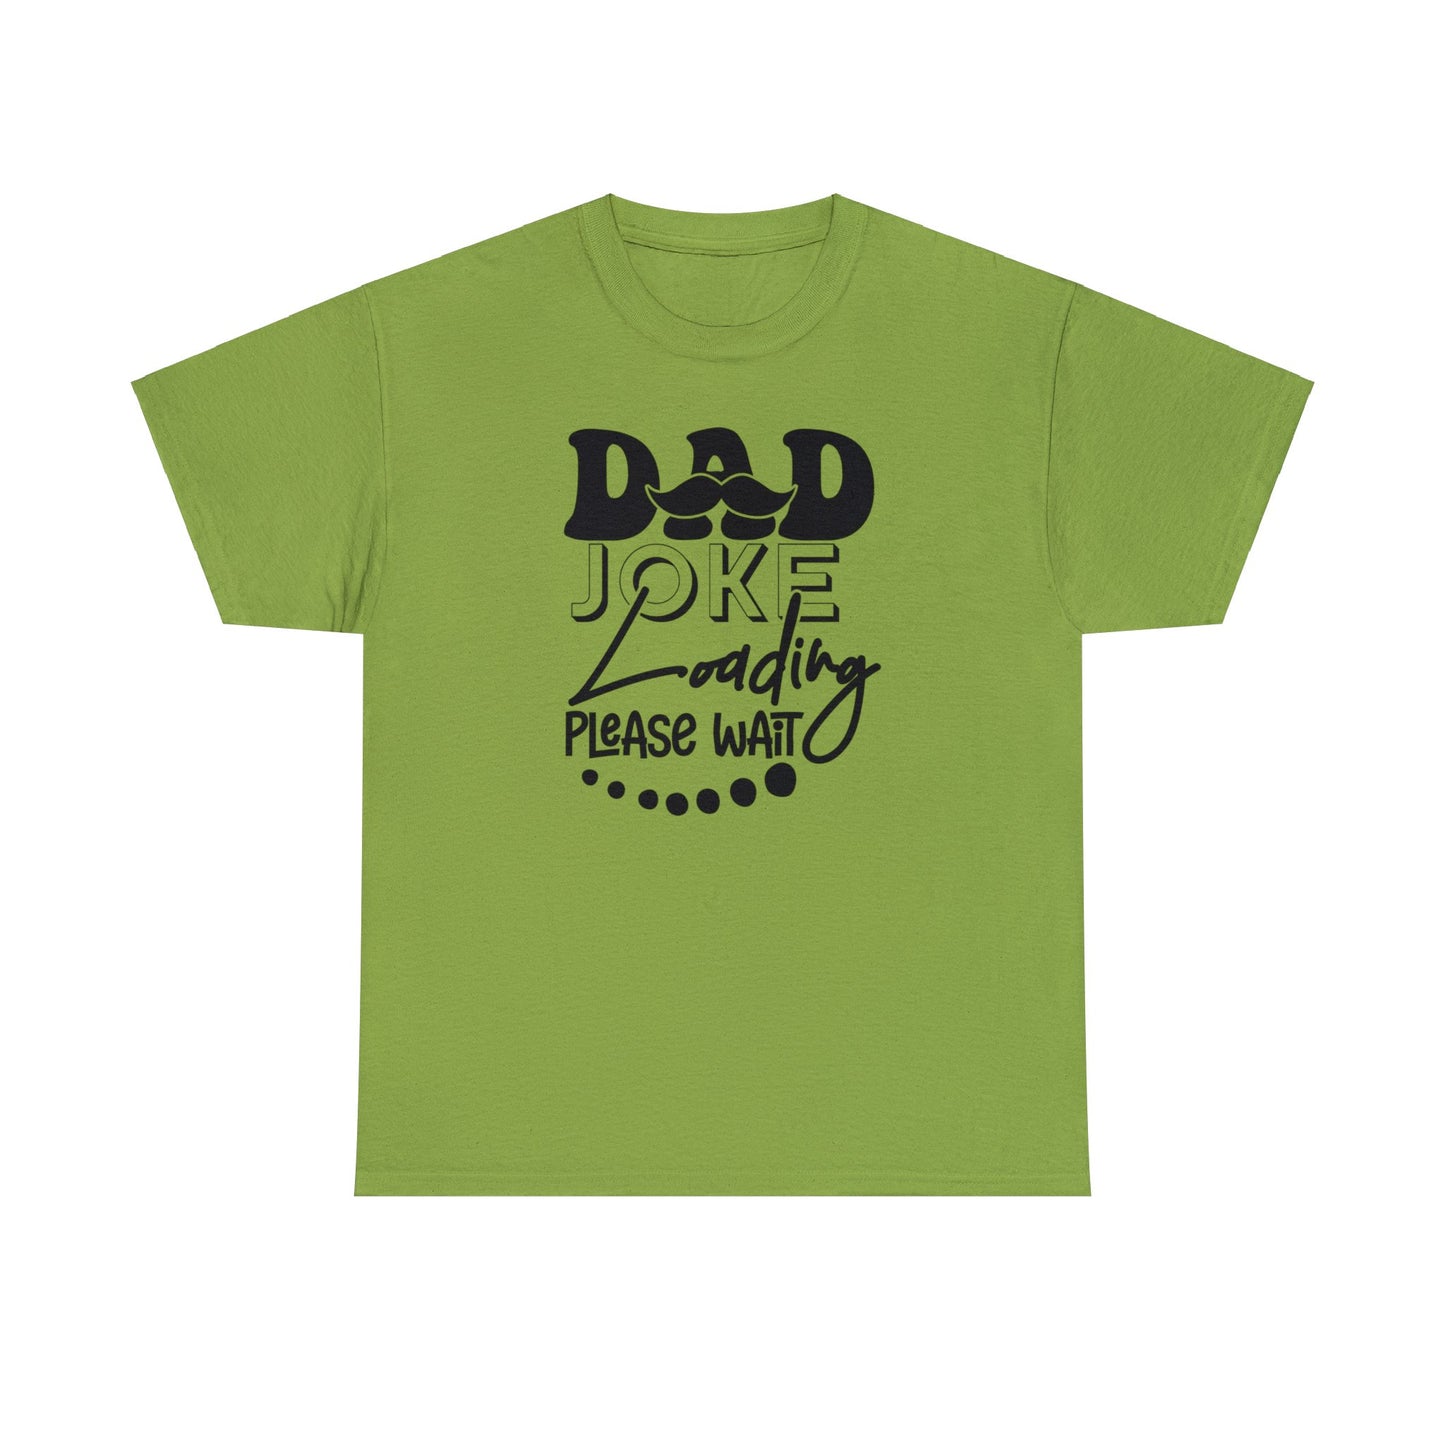 Funny Dad T-Shirt For Dad Joke T Shirt For Cool Father's Day TShirt